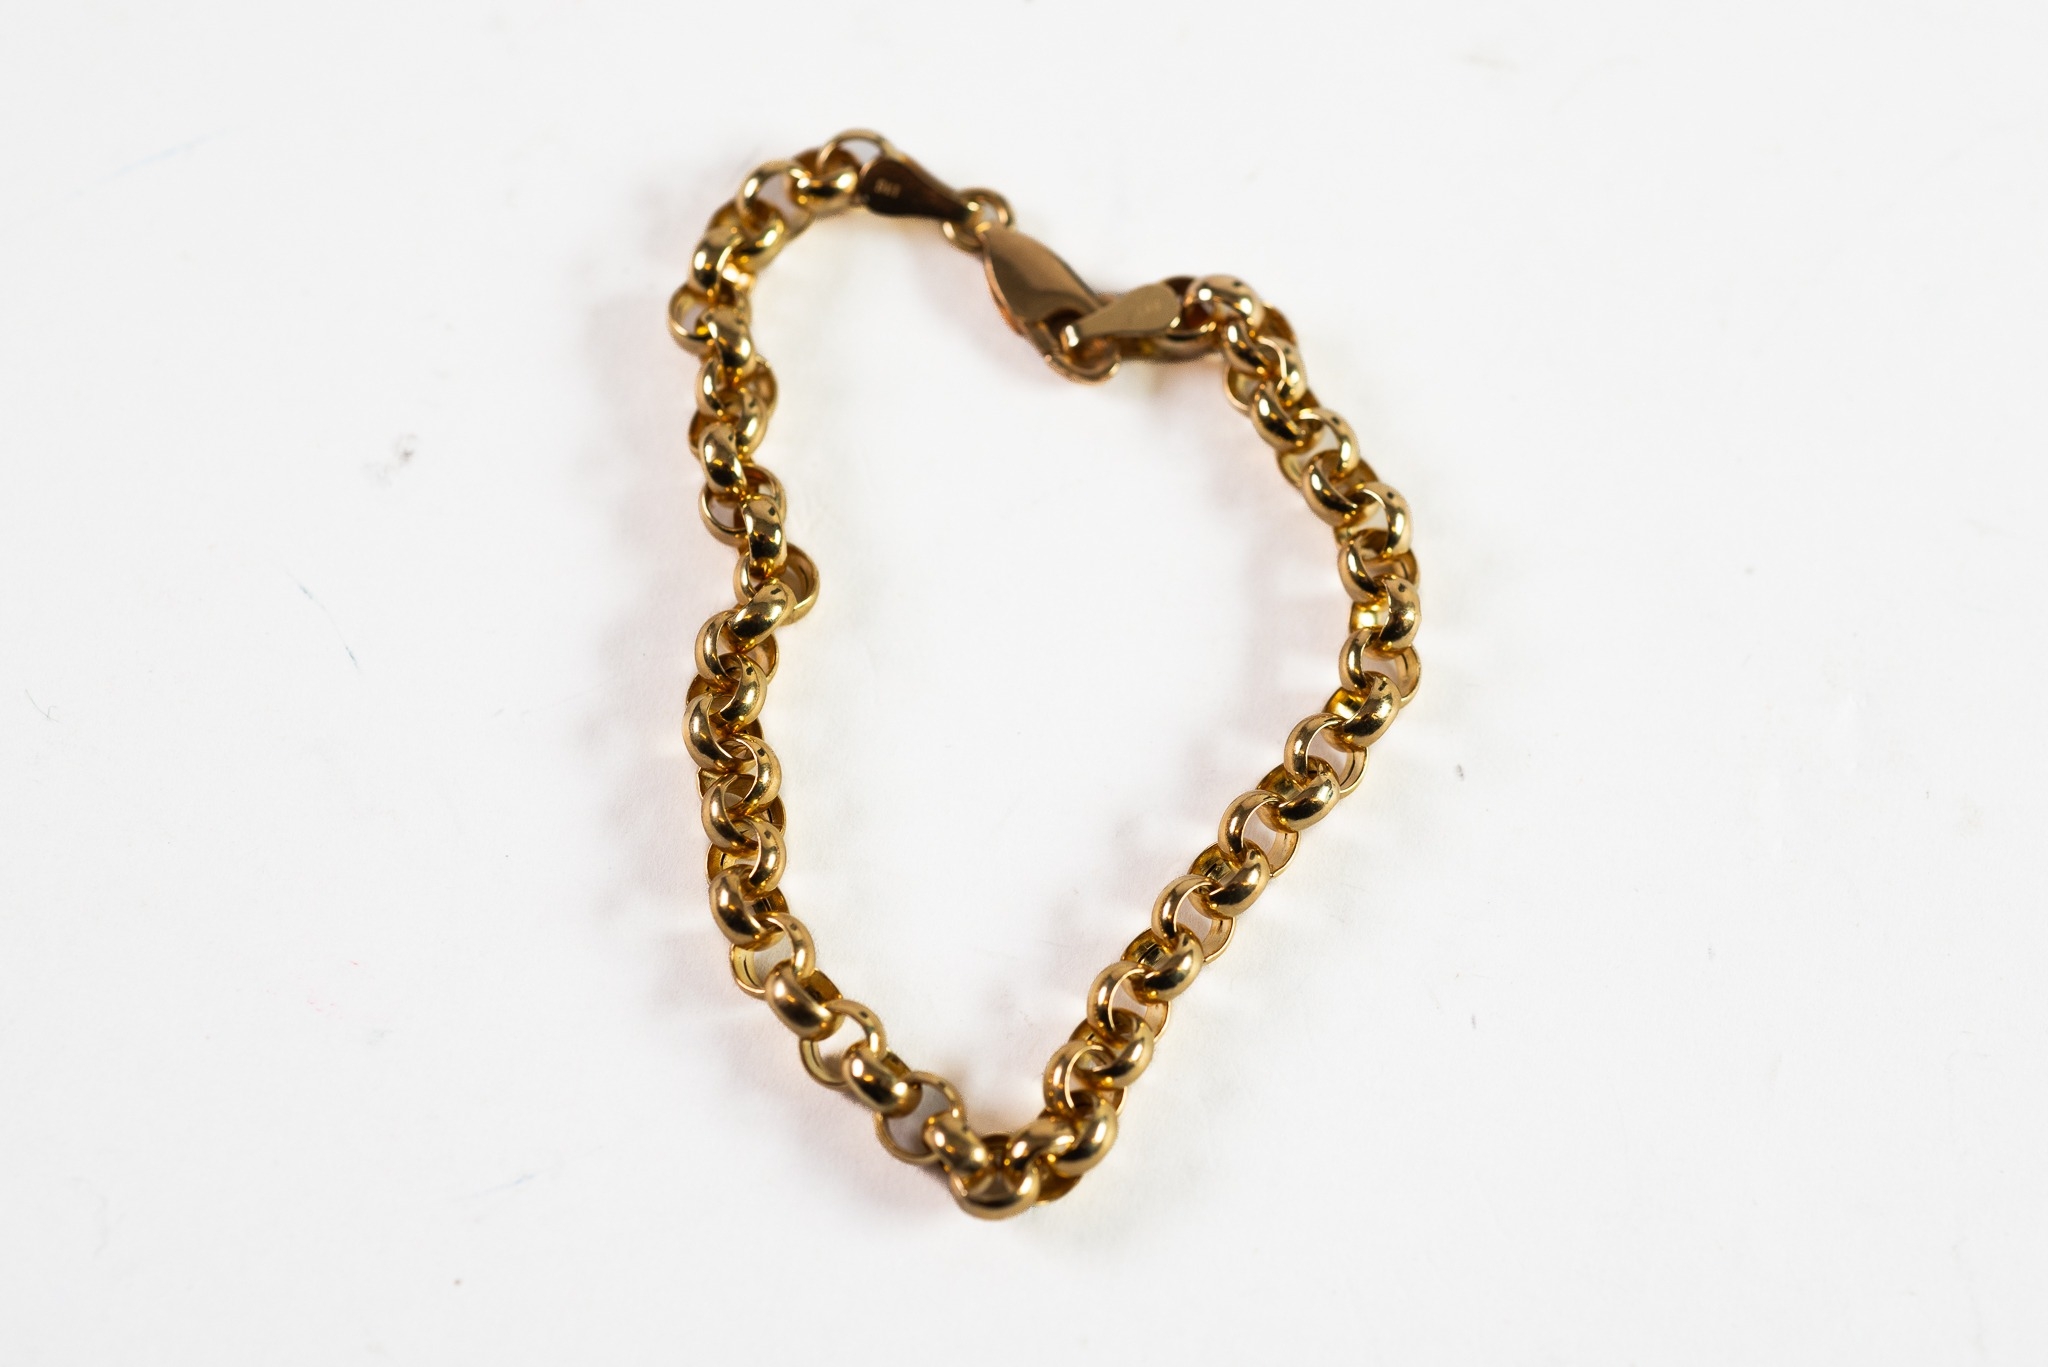 9ct GOLD BELCHER LINK CHAIN BRACELET, with bayonet clasp, 7in (18cm) long, 3.6gms